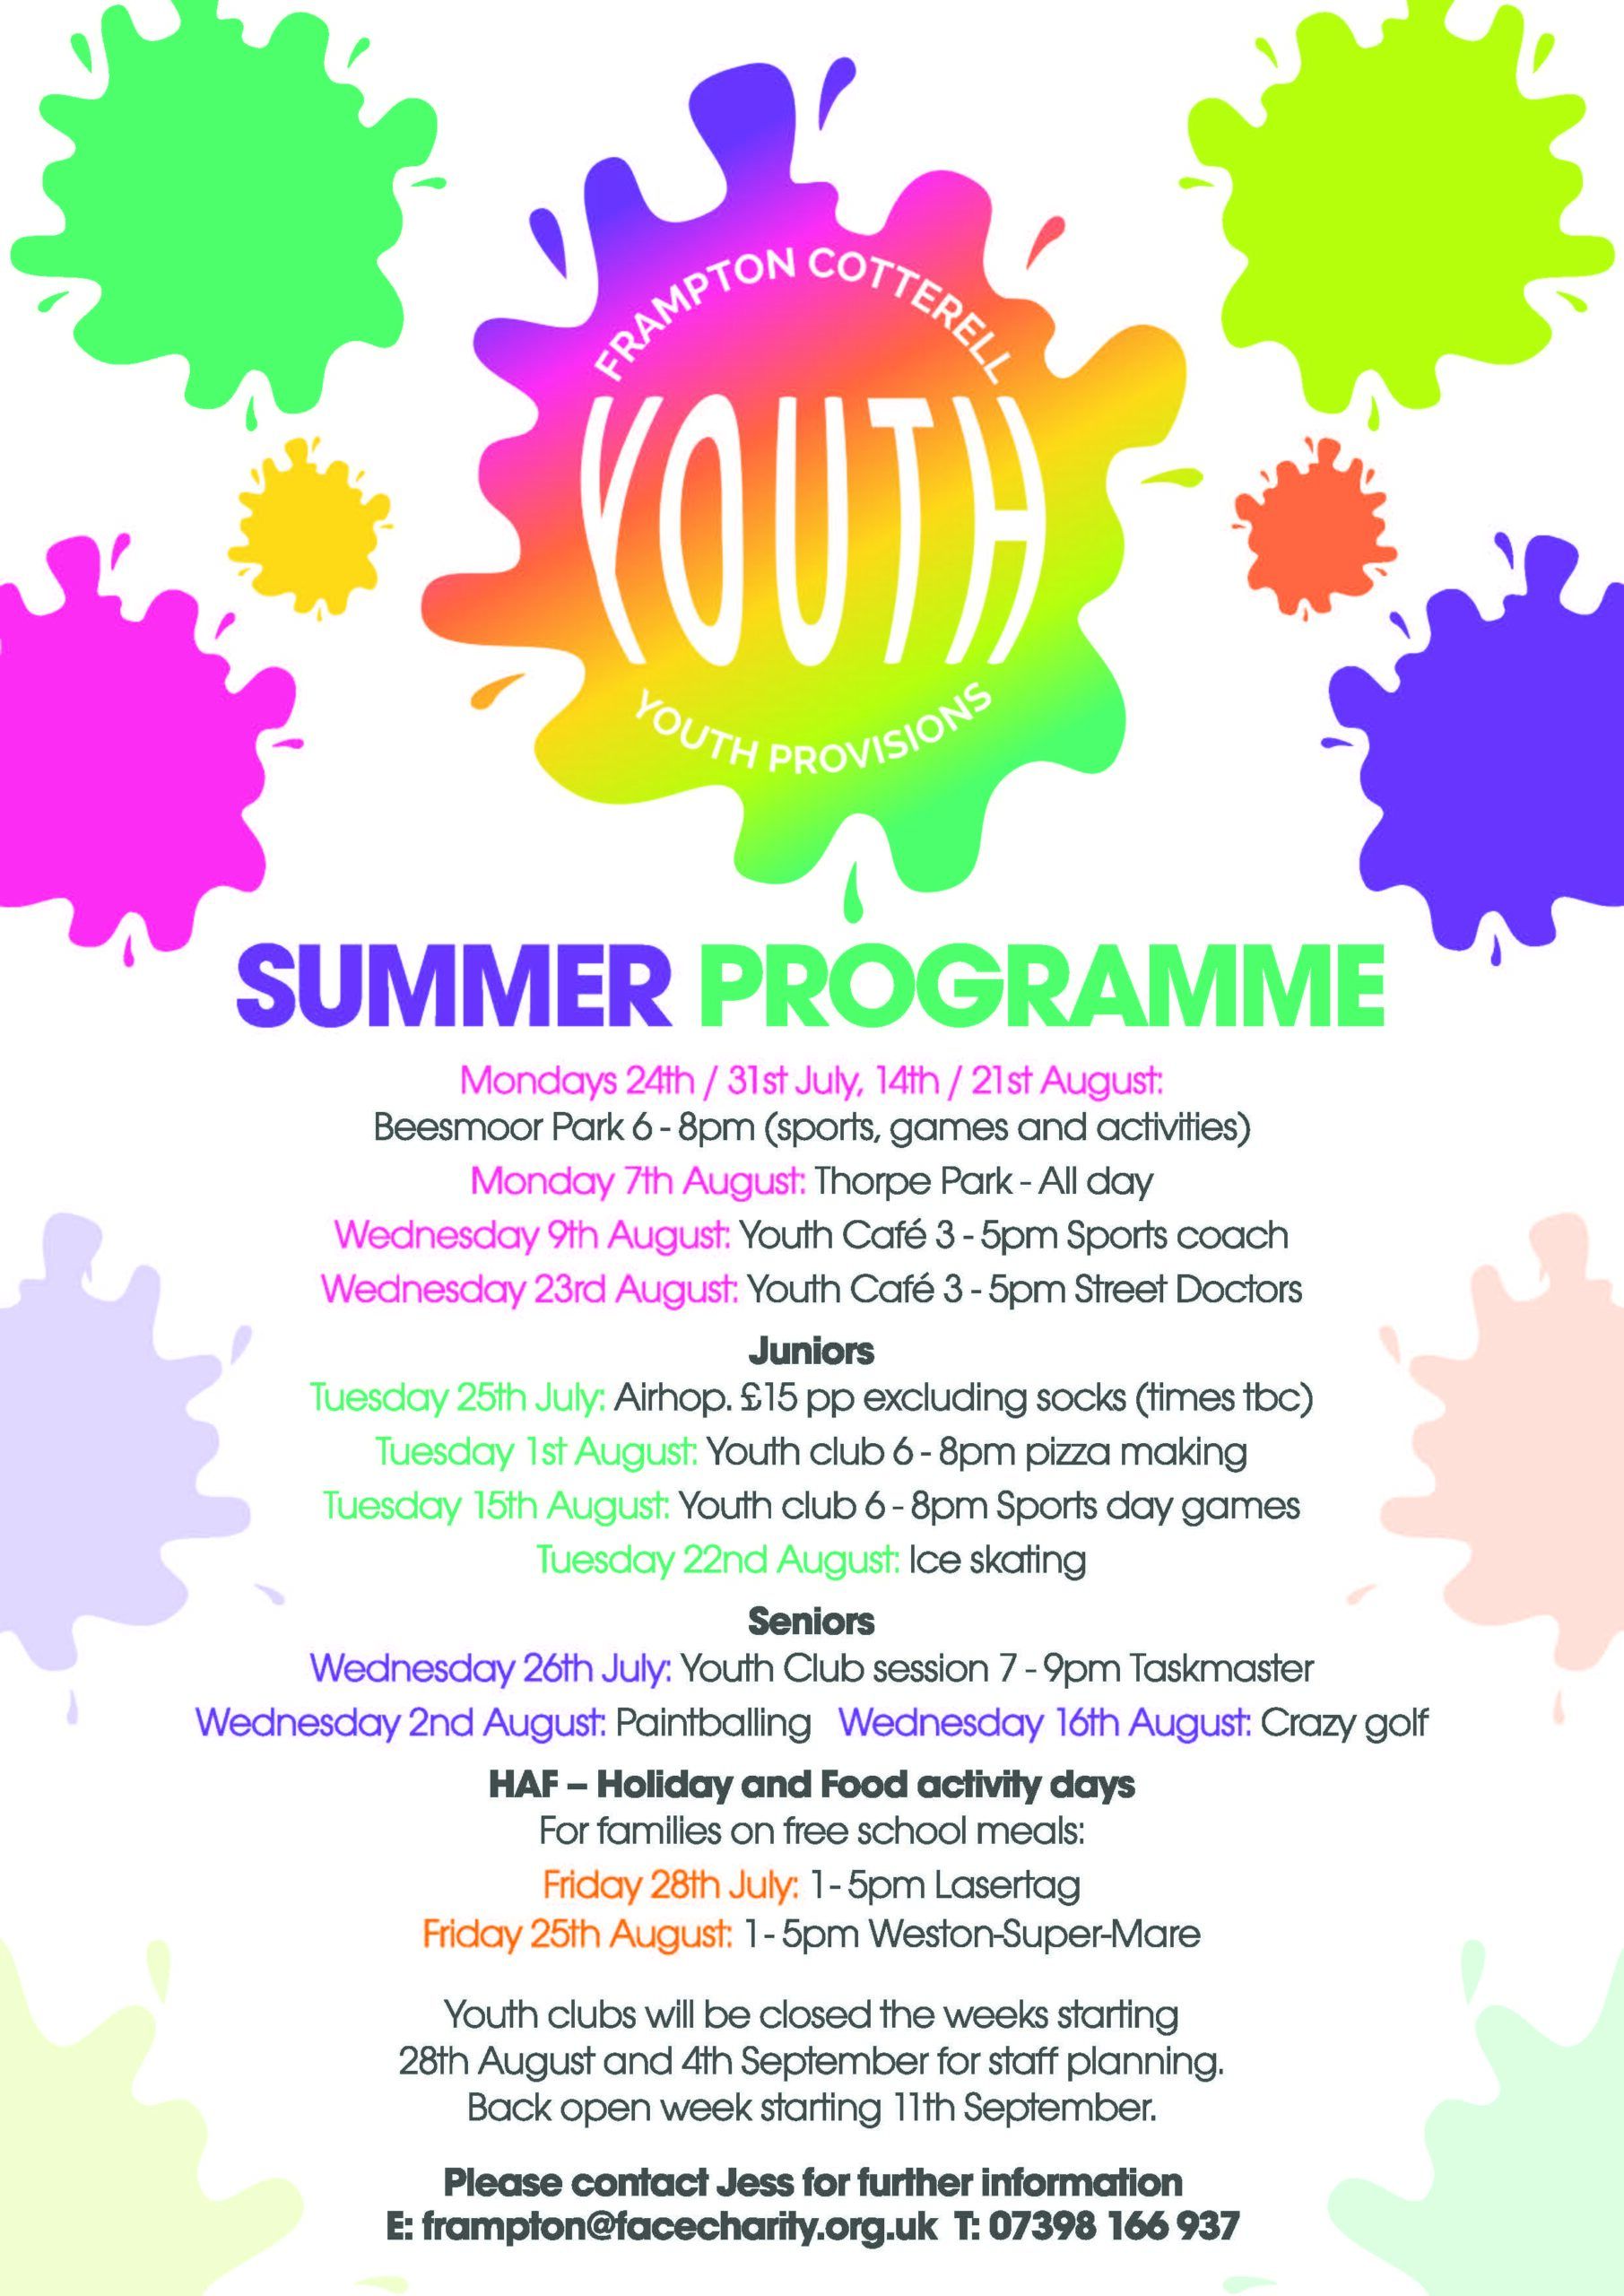 Frampton Cotterell YOUTH  / Youth Provisions. Summer Programme

Mondays 24th / 31st July, 14th / 21st August: Beesmoor Park 6-8pm (sports, games and activities) 

Monday 7th August: Thorpe Park - All day

Wednesday 9th August: Youth Cafe 3 - 5pm Sports coach 

Wednesday 23rd August: Youth Cafe 3 - 5pm Street Doctors

Juniors

Tuesday 25th July: Airhop. £15 pp excluding socks (times tbc) 

Tuesday 1st August: Youth club 6- 8pm pizza making 

Tuesday 15th August: Youth club 6 - 8pm Sports day games 

Tuesday 22nd August: Ice skating
Seniors

Wednesday 26th July: Youth Club session 7 - 9pm Taskmaster 

Wednesday 2nd August: Paintballing 

Wednesday 16th August: Crazy golf

HAF - Holiday and Food activity days 

For families on free school meals: 

Friday 28th July: 1 - 5pm Lasertag

Friday 25th August: 1 - 5pm Weston-Super-Mare

Youth clubs will be closed the weeks starting 28th August and 4th September for staff planning.

Back open week starting 11th September.

Please contact Jess for further information

E: frampton@facecharity.org.uk T: 07398 166 937
